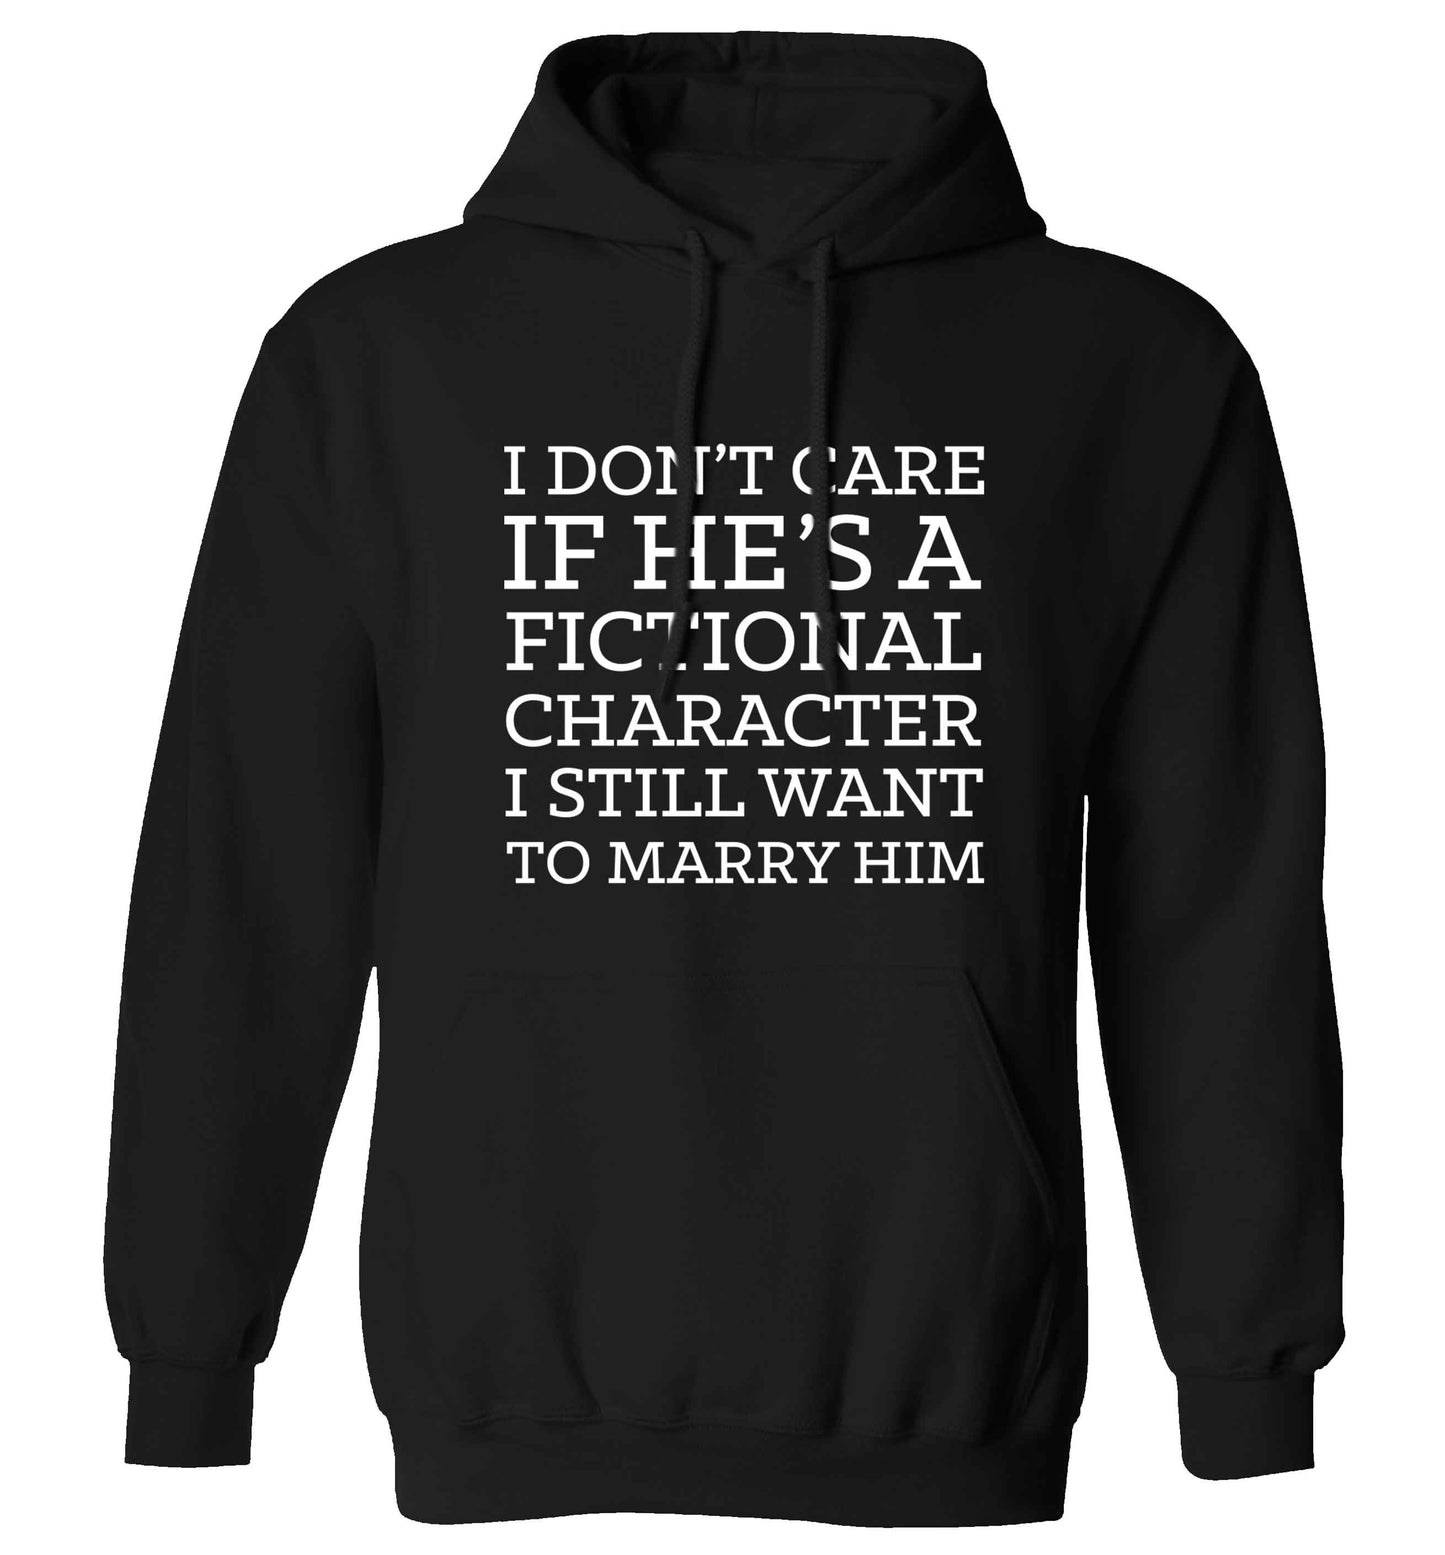 I don't care if he's a fictional character I still want to marry him adults unisex black hoodie 2XL